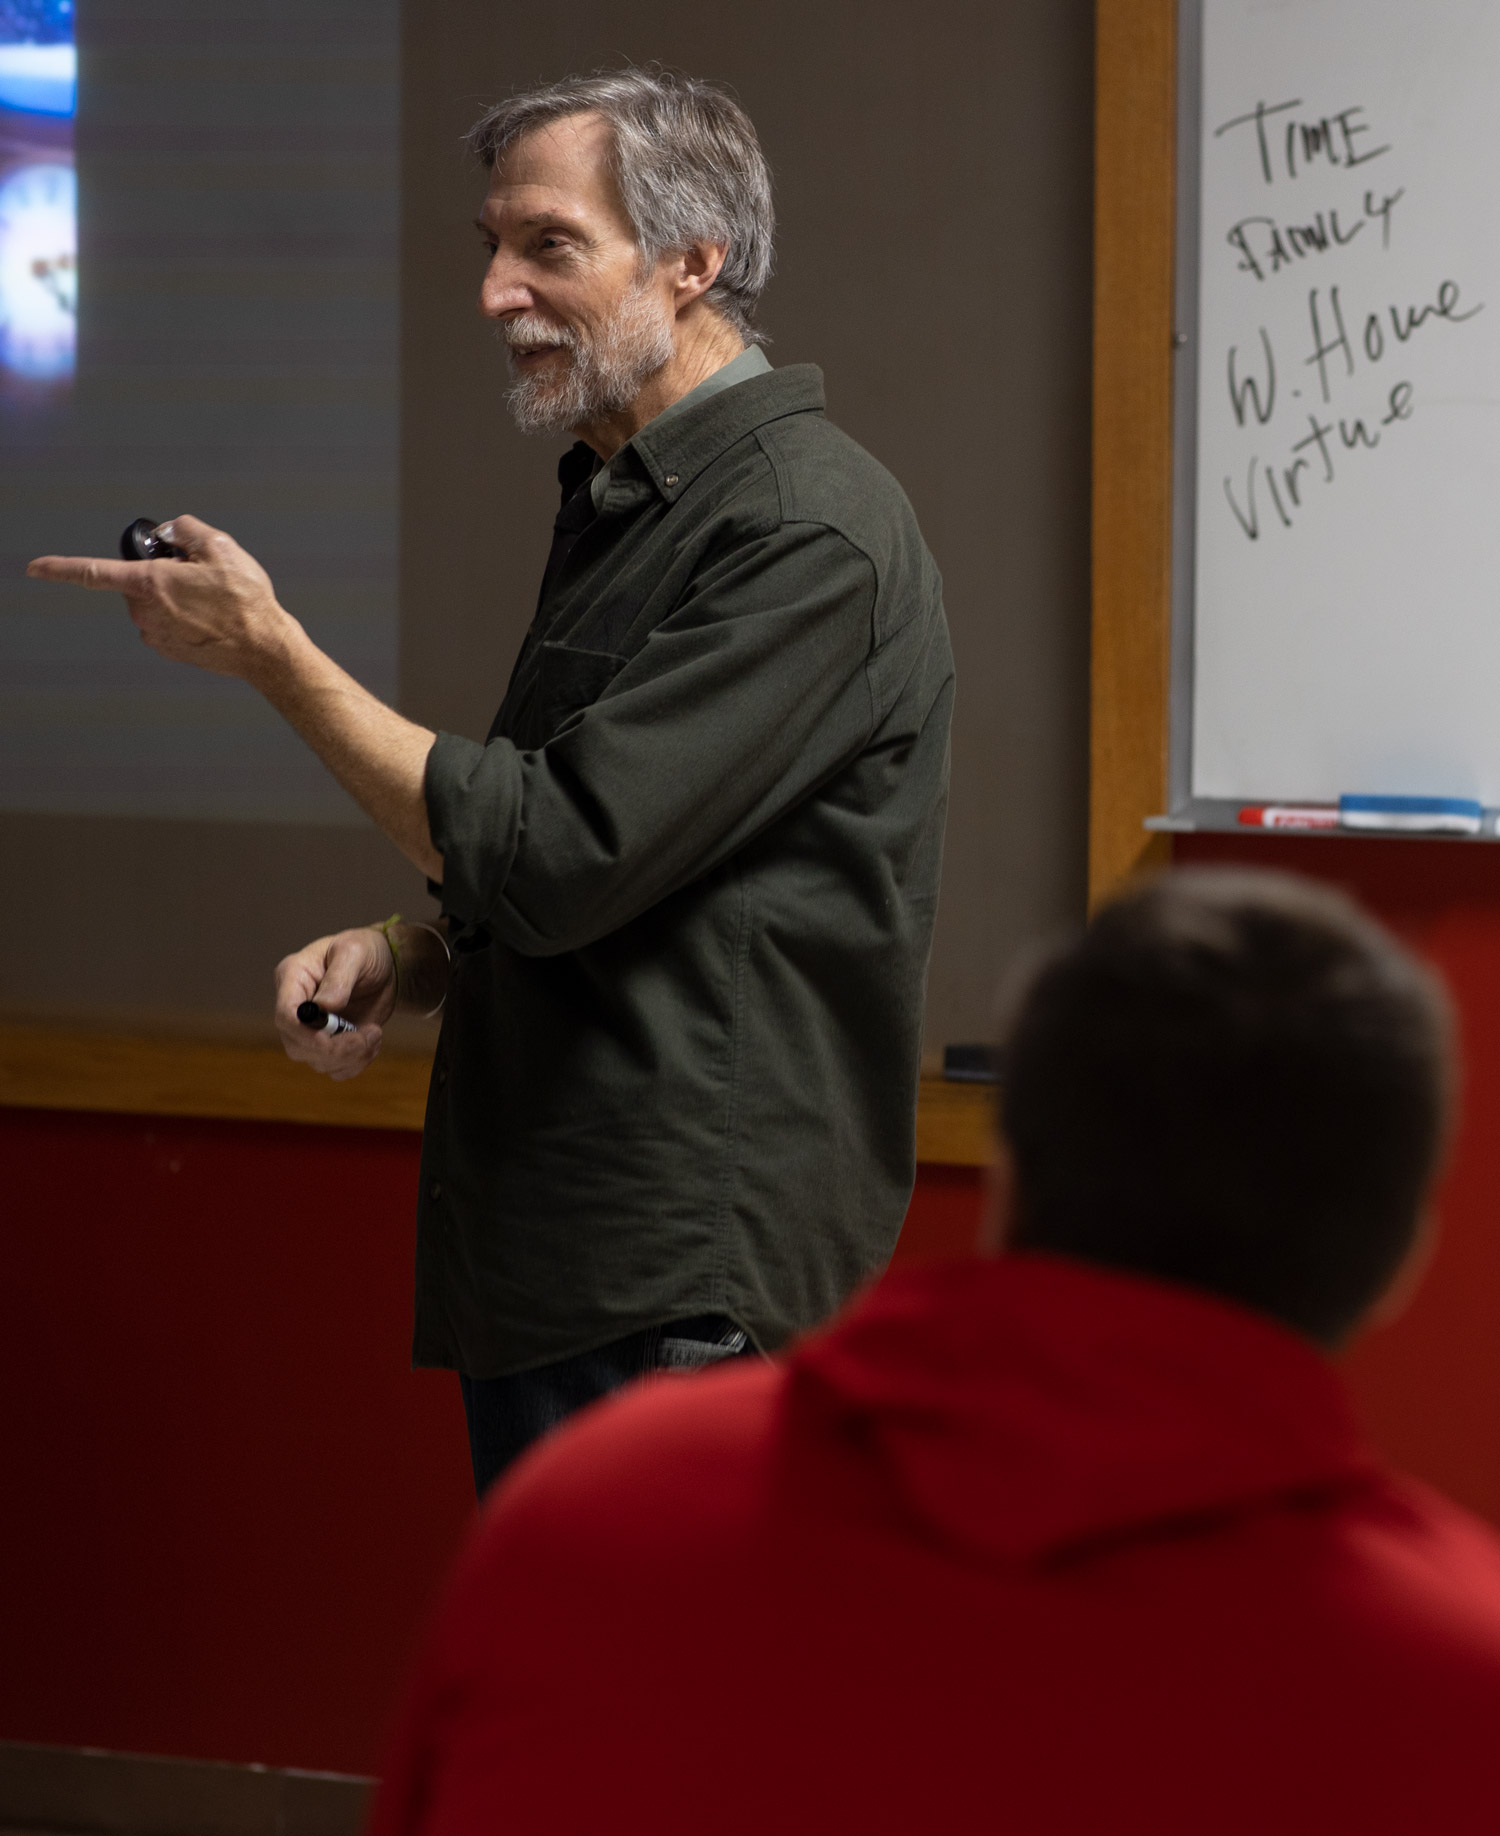 Professor of Art and Design teaches a lecture in the Wilson Art Building.